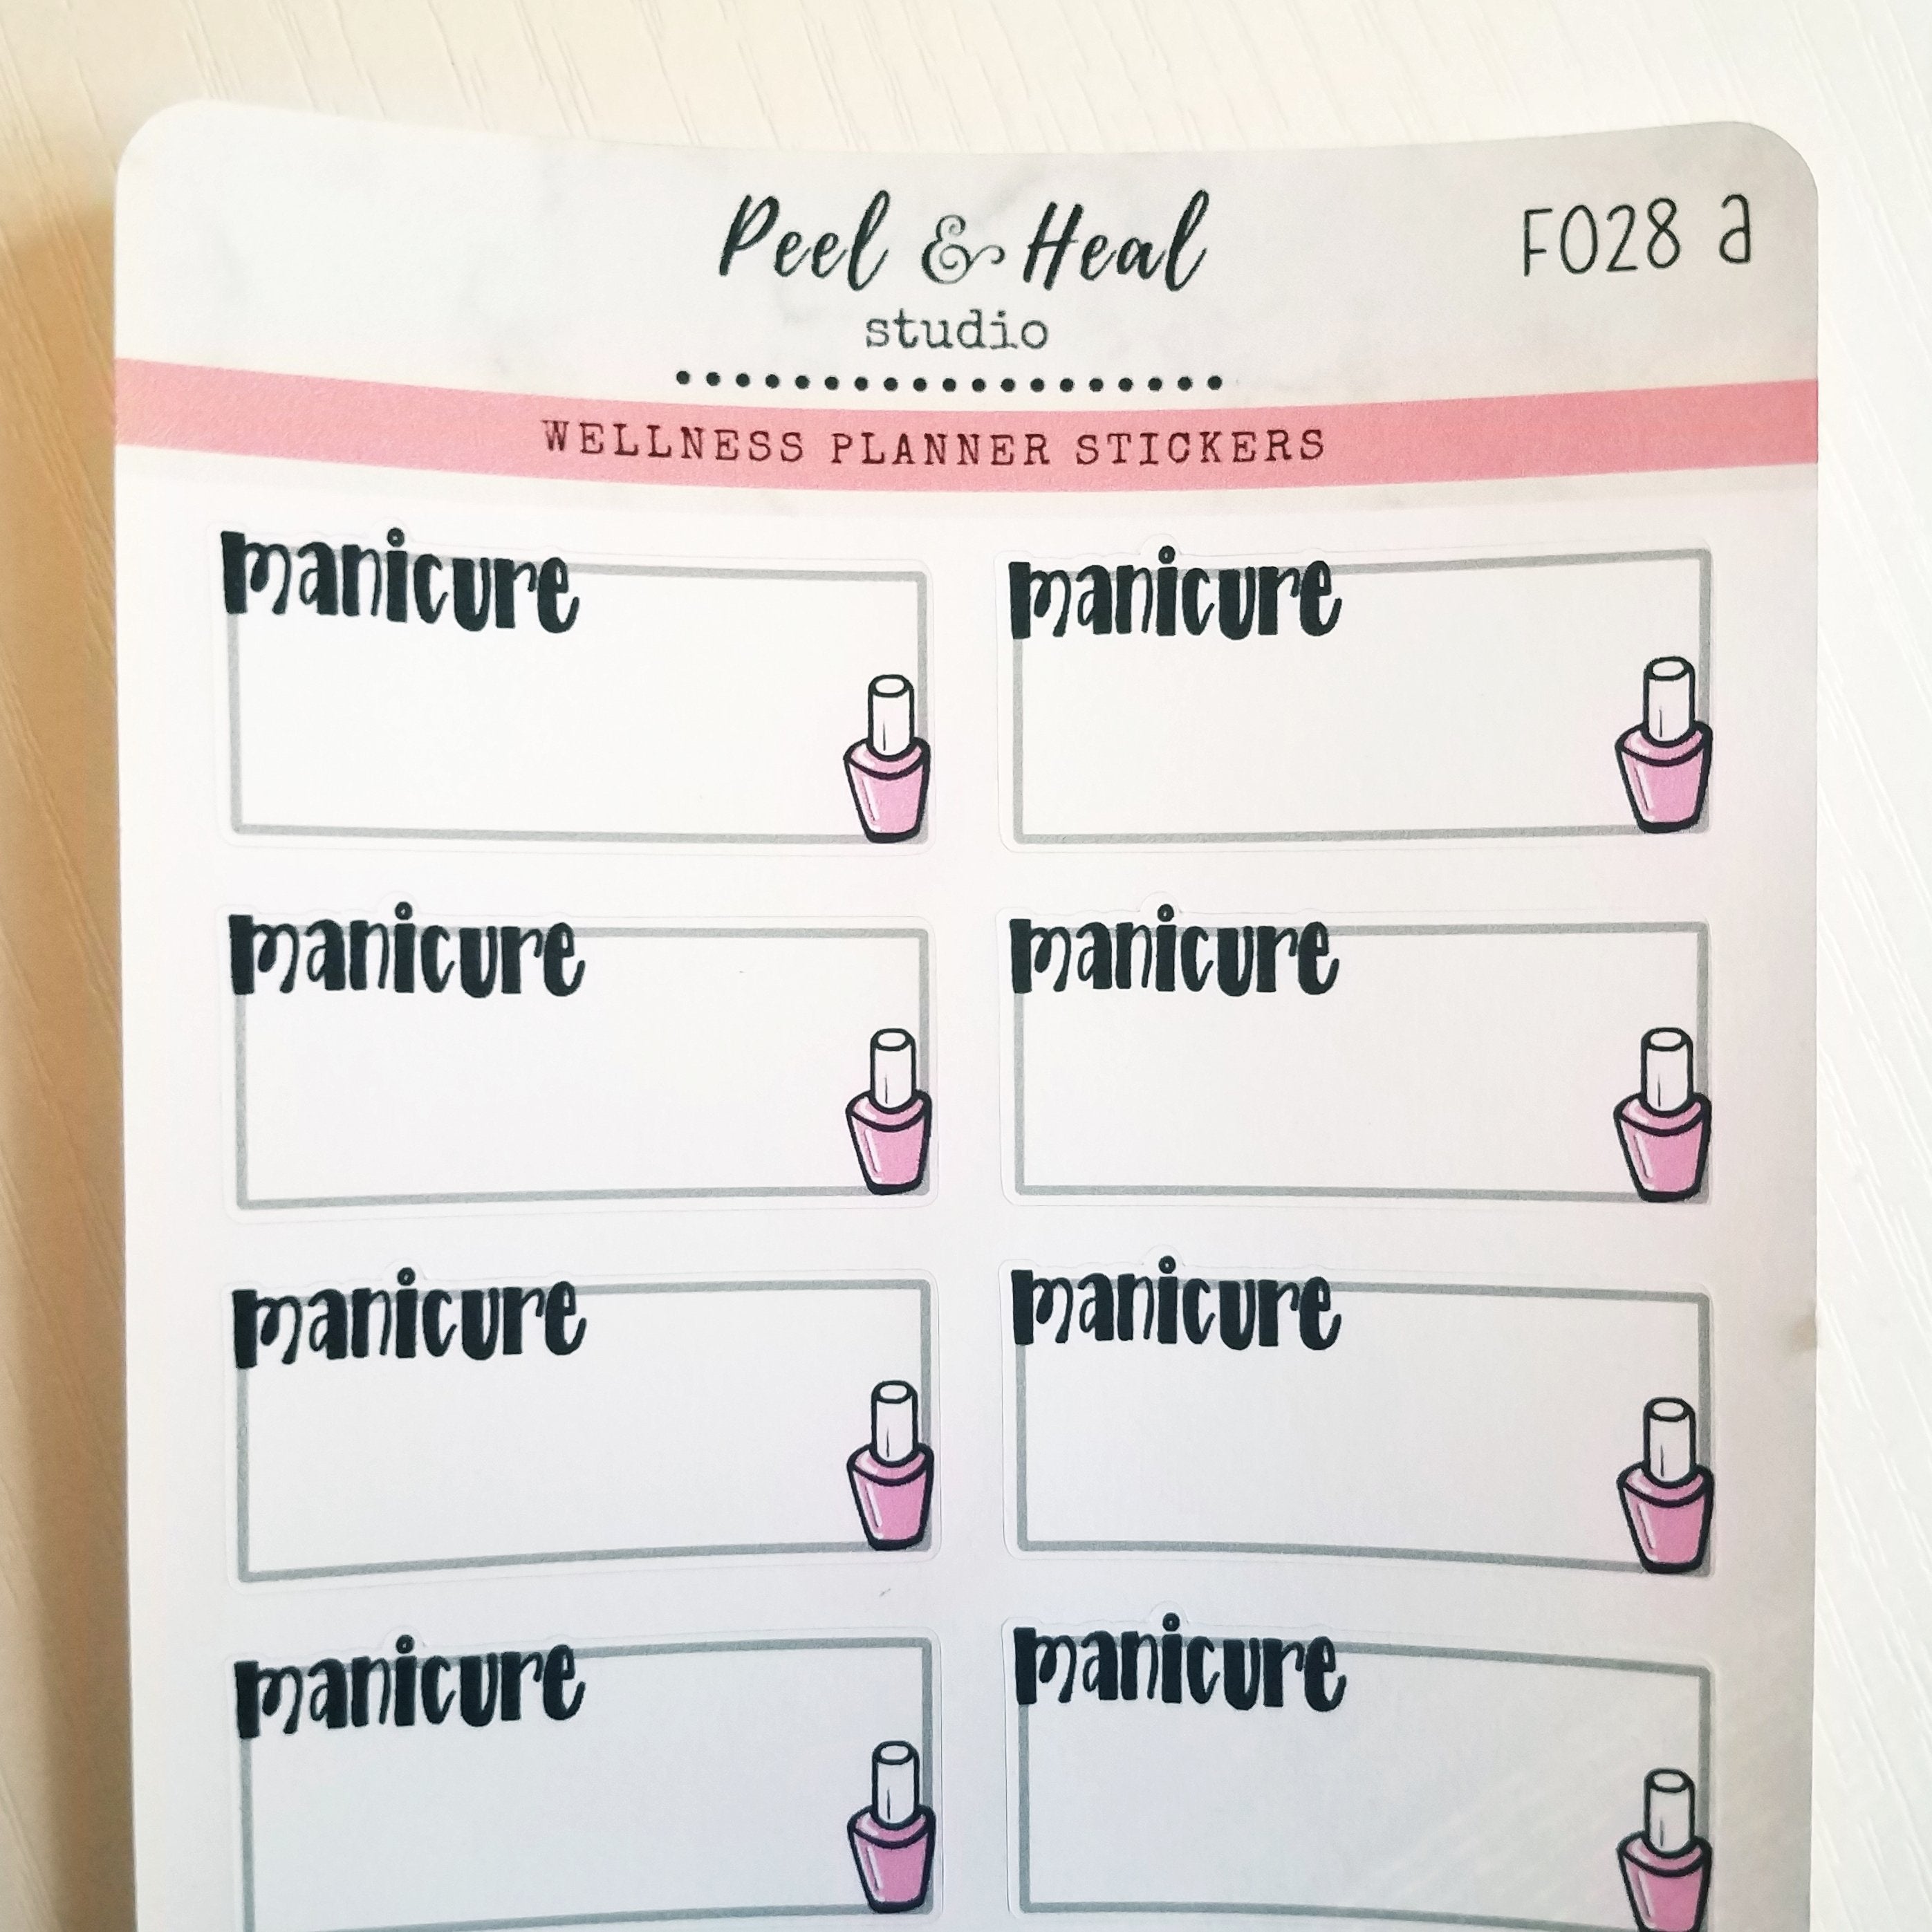 Coping Skills Doodle Boxes - Manicure - Mani Doodle - Functional Planner Stickers - Peel & Heal Studio